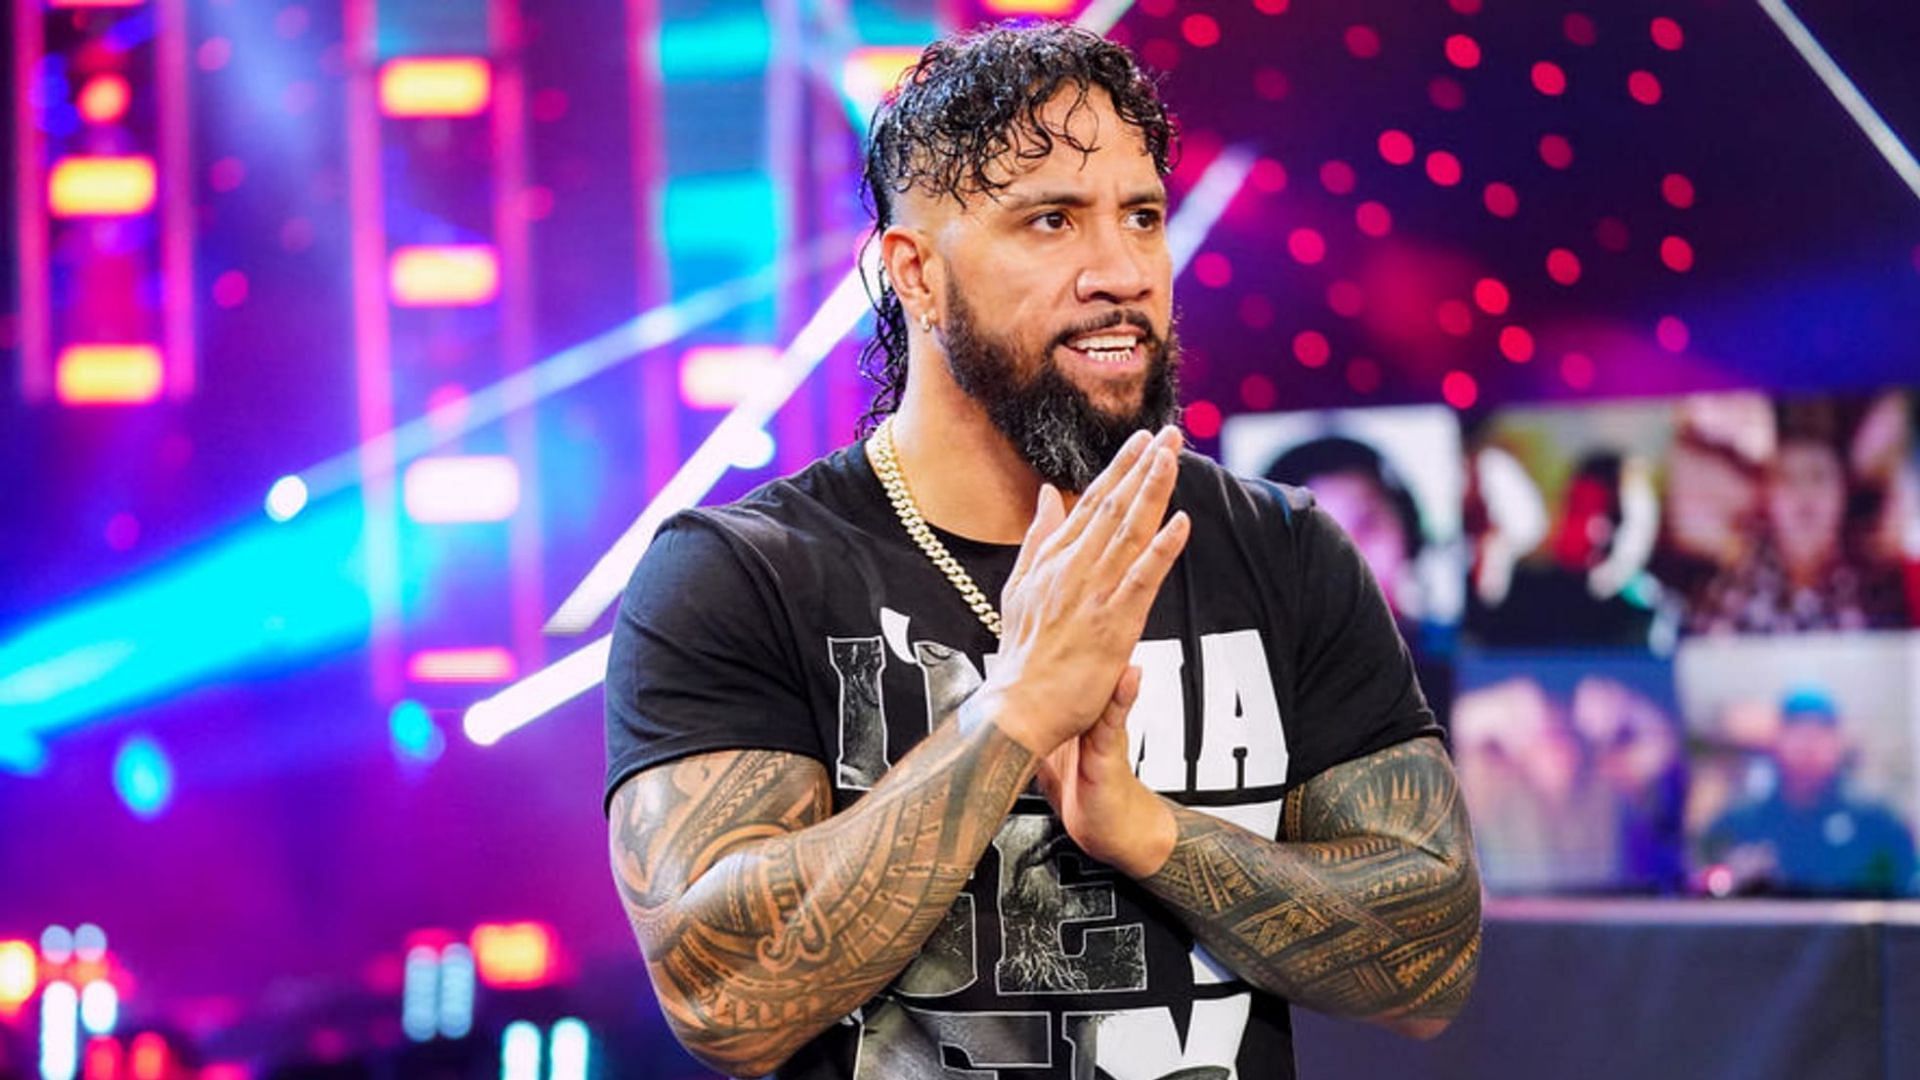 WWE Superstar and member of The Bloodline Jey Uso